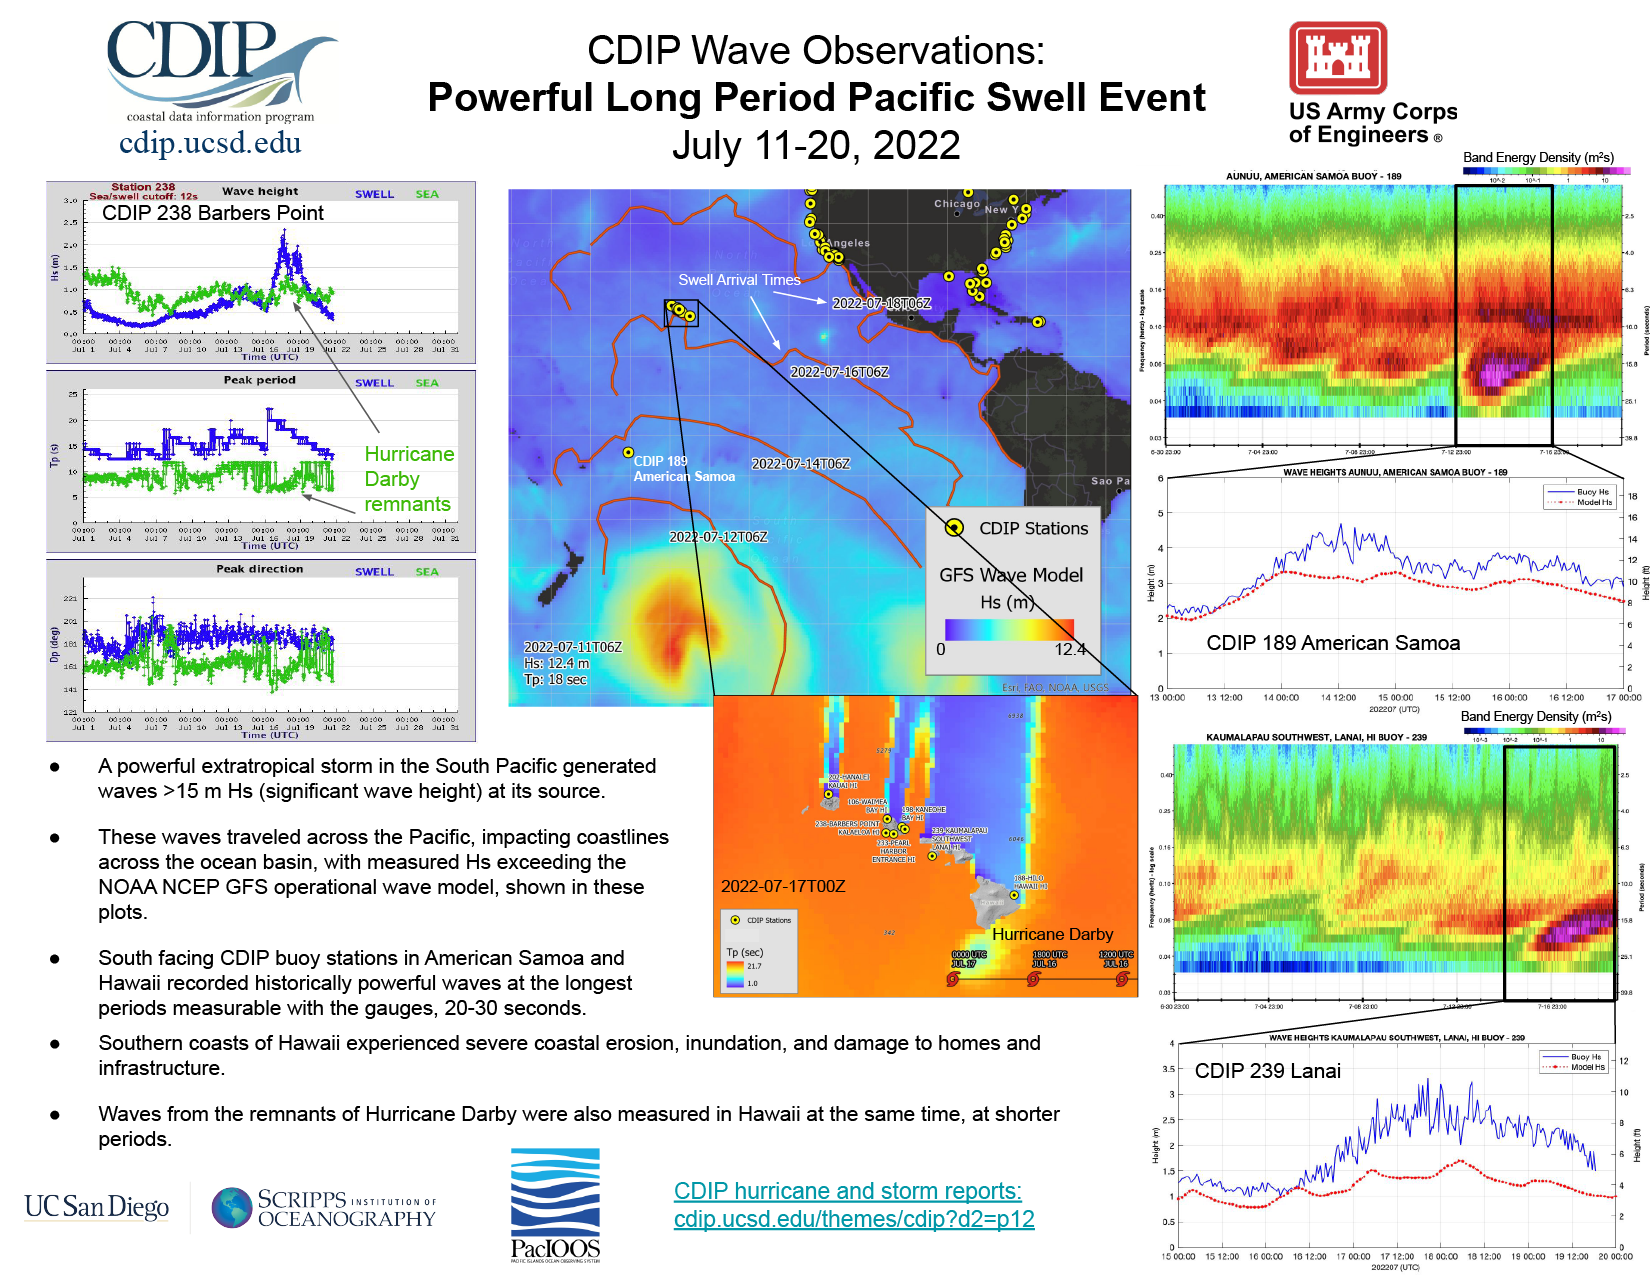 Powerful Long Period Pacific Swell Event